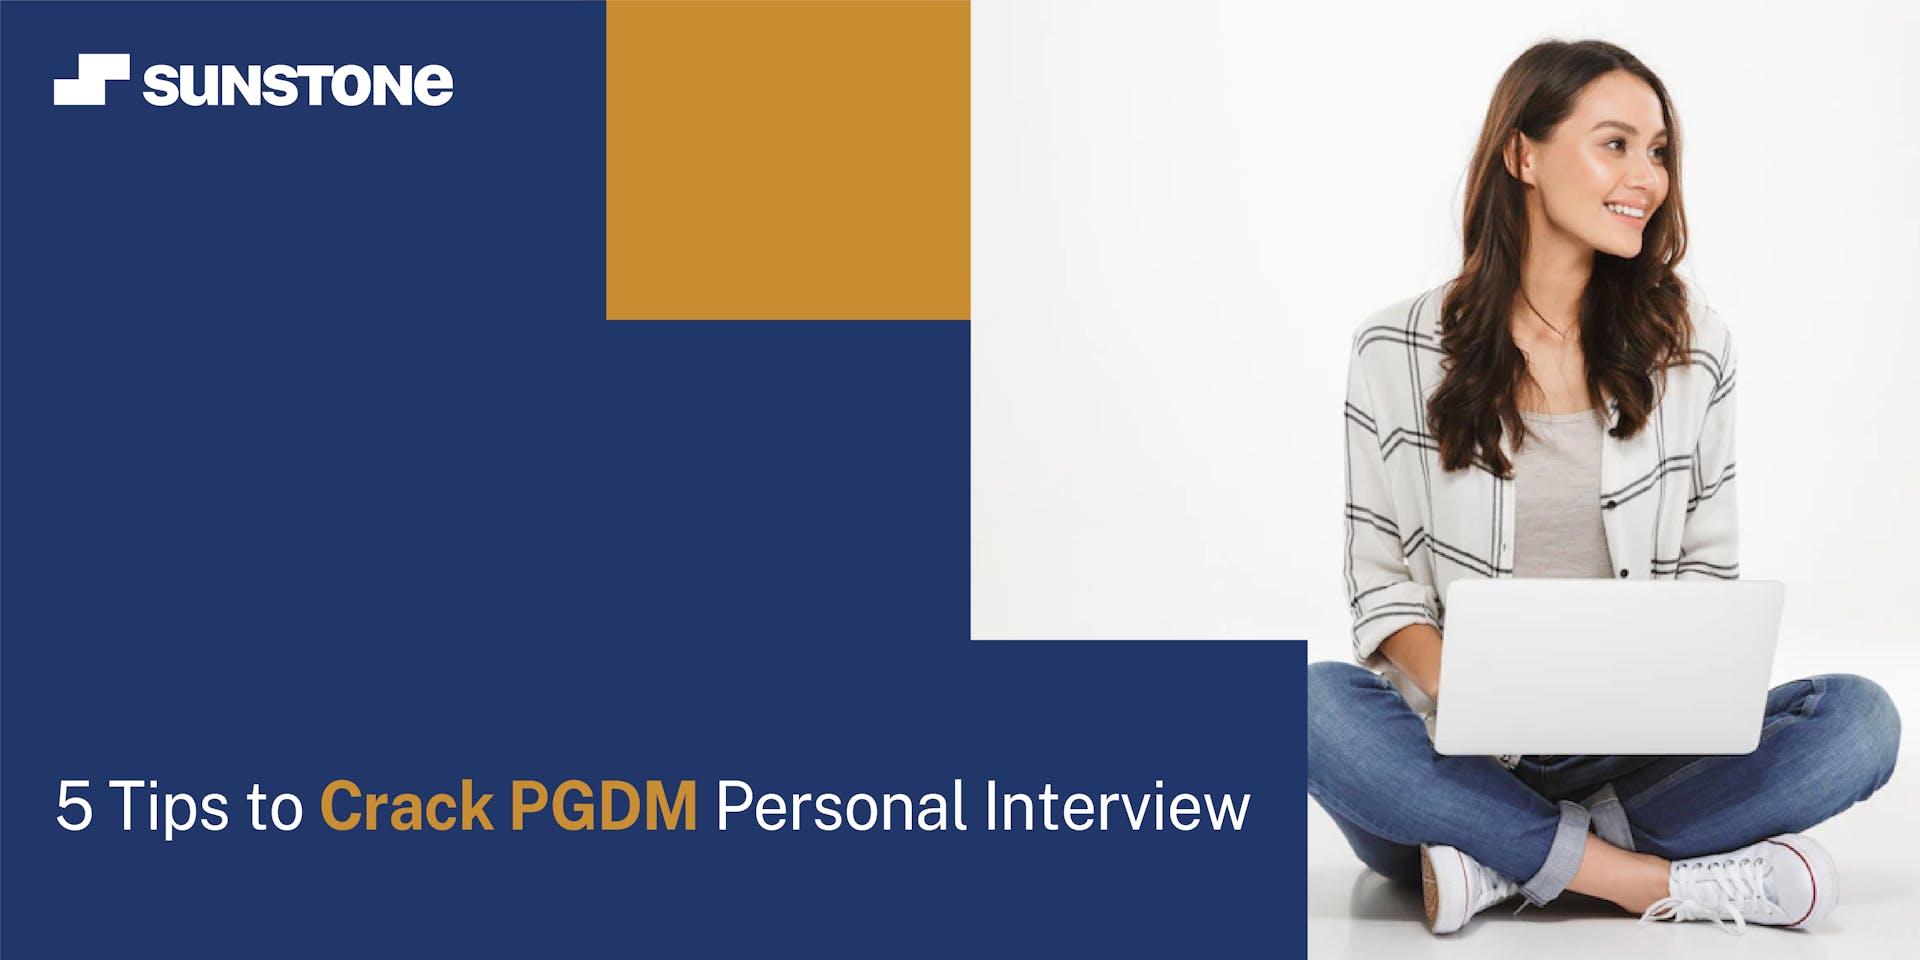 5 tips to crack PGDM Personal Interview